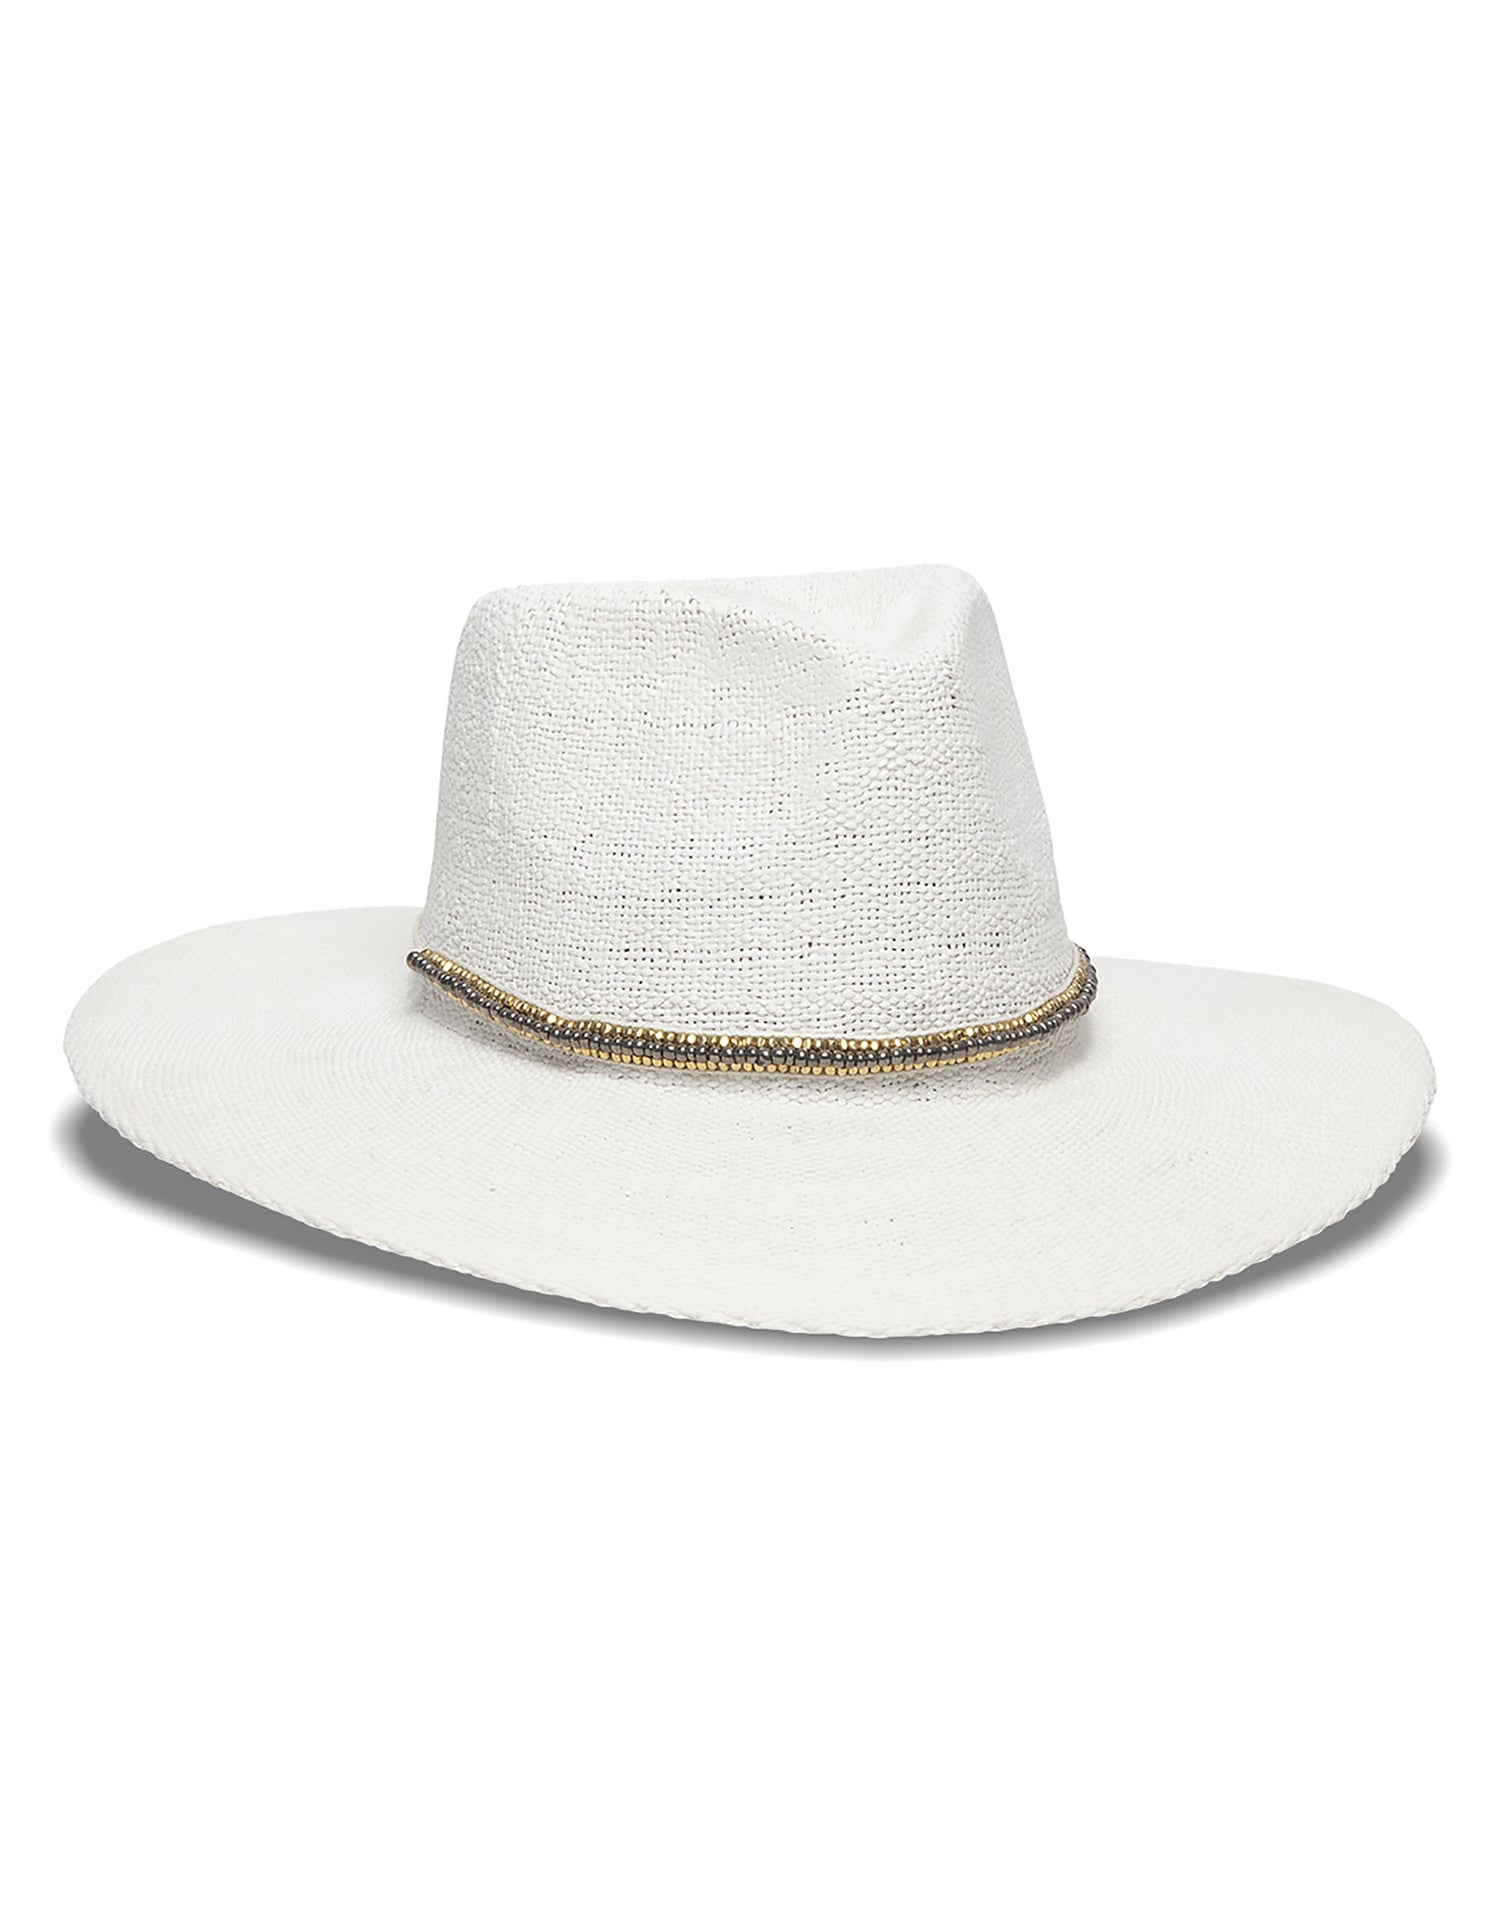 Nikki Beach's Monte Carlo Rancher Hat in White with Metal Beaded Trim - product view